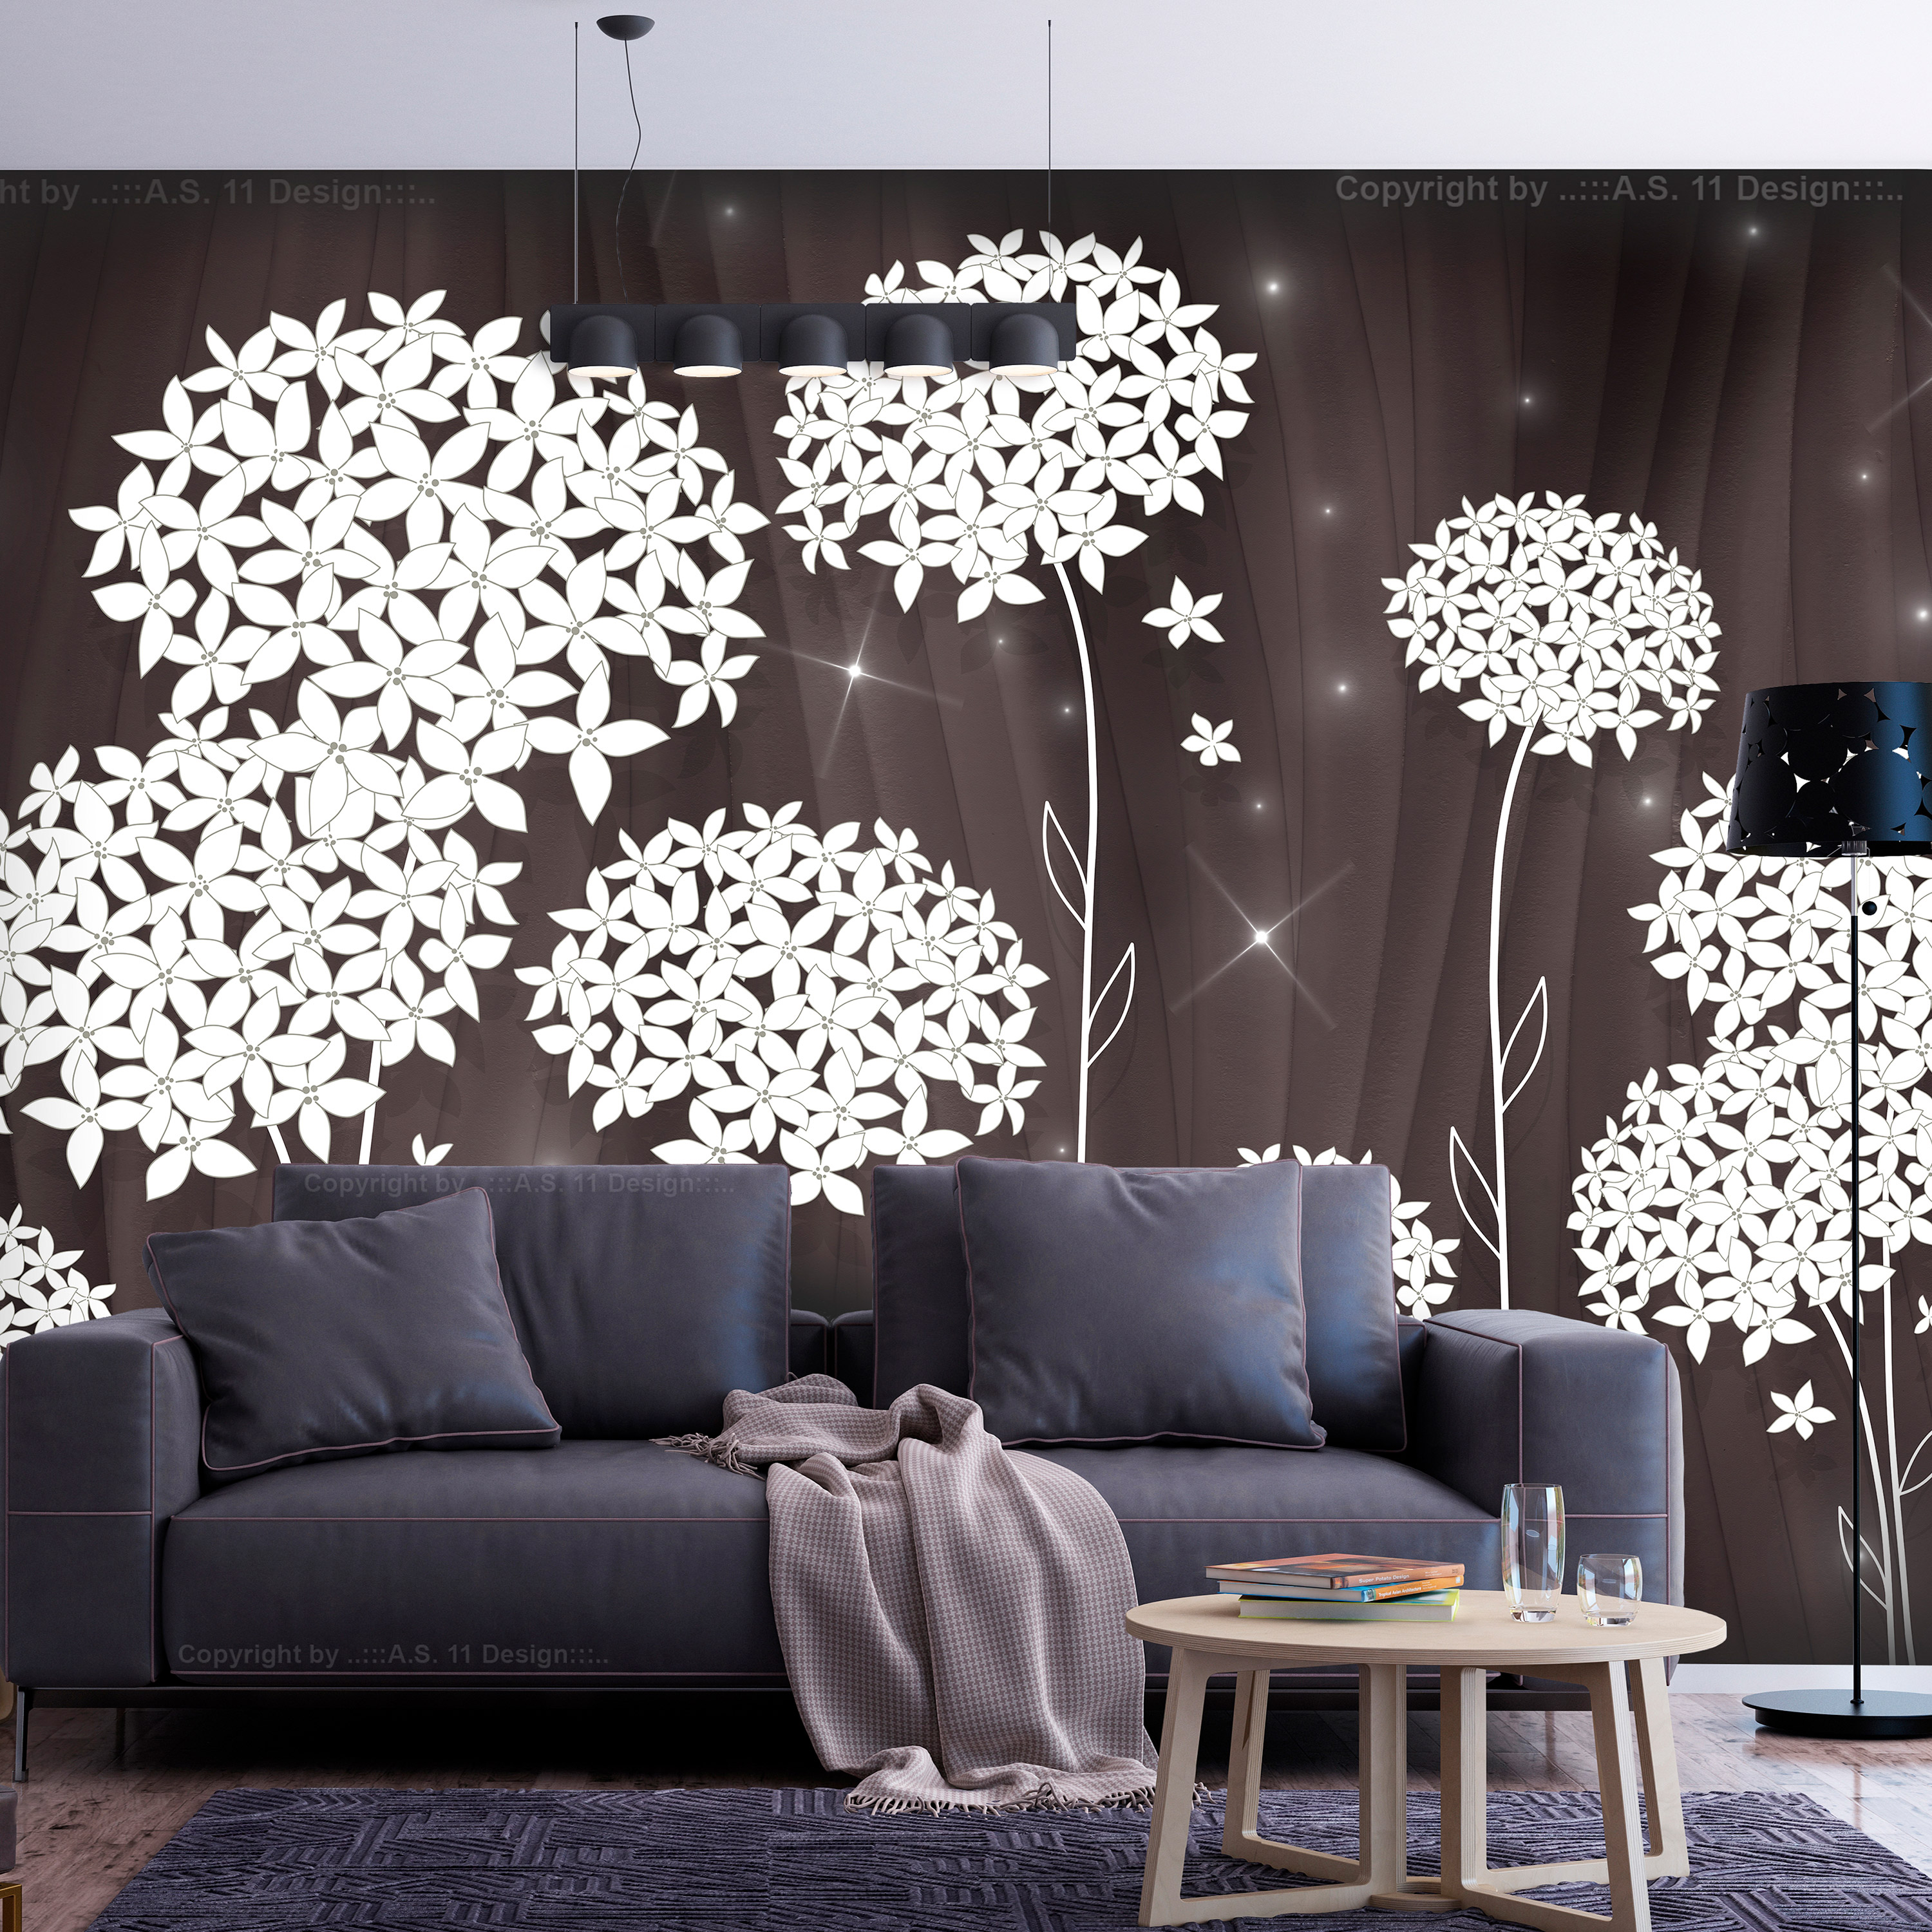 Self-adhesive Wallpaper - Magical Composition - 196x140